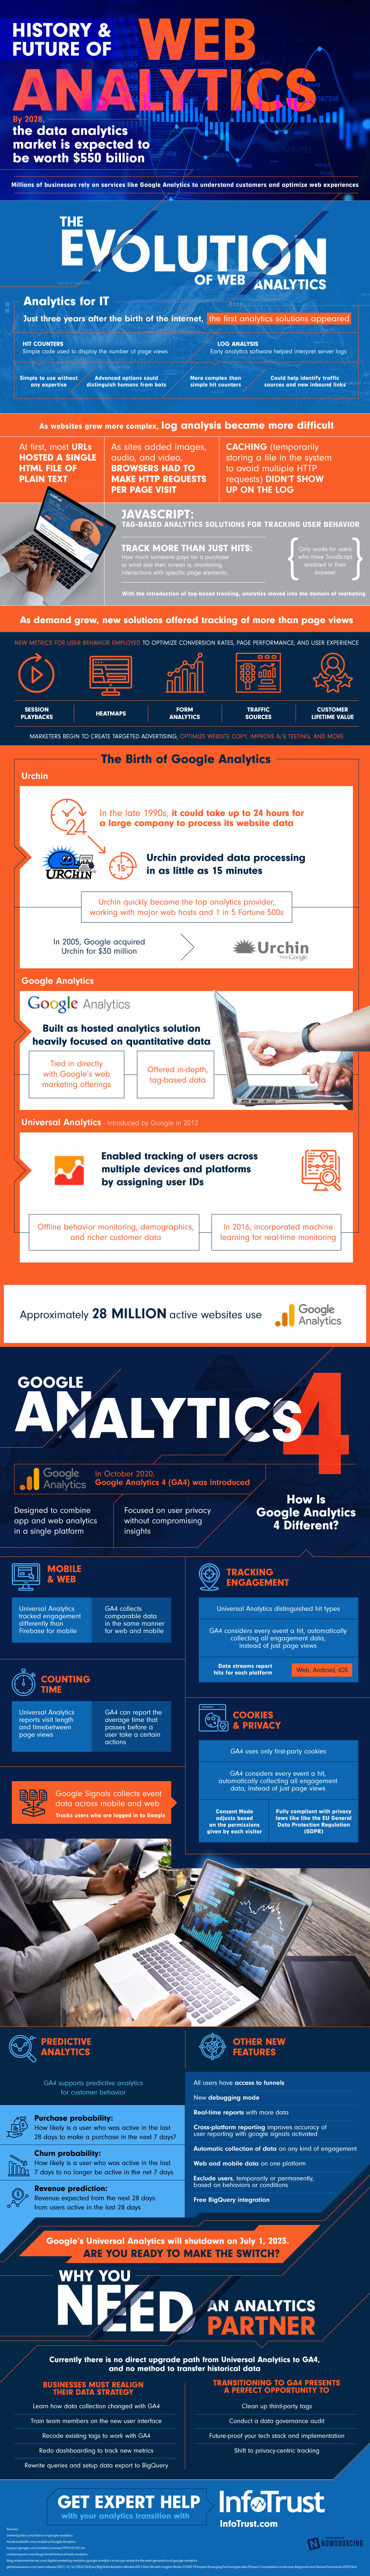 Infographic: The next steps for web analytics